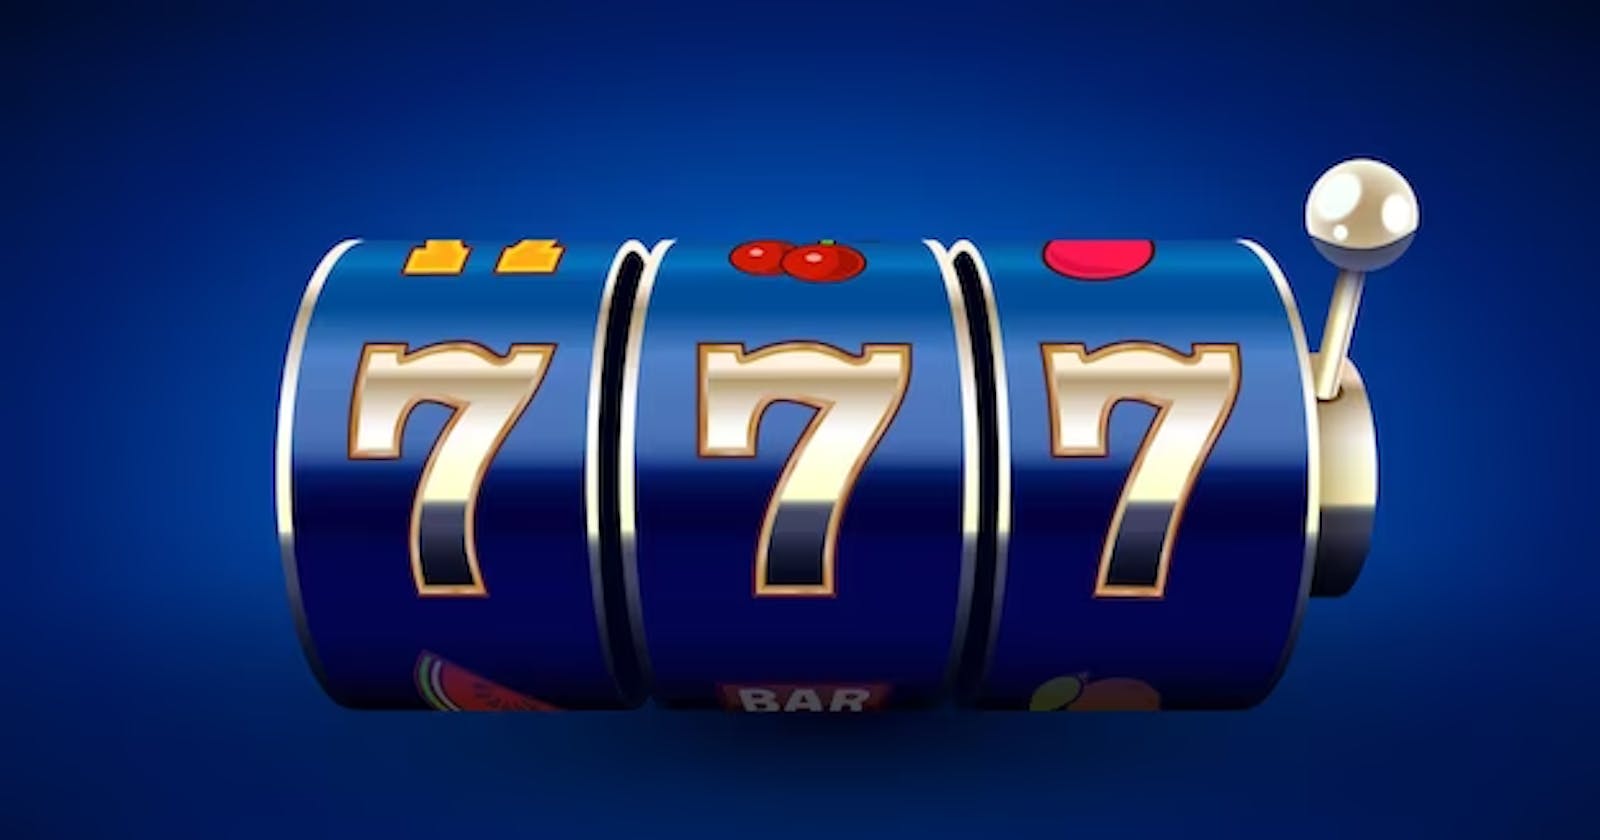 Exploring Online Slots: What Casinos Can You Gamble at 18?